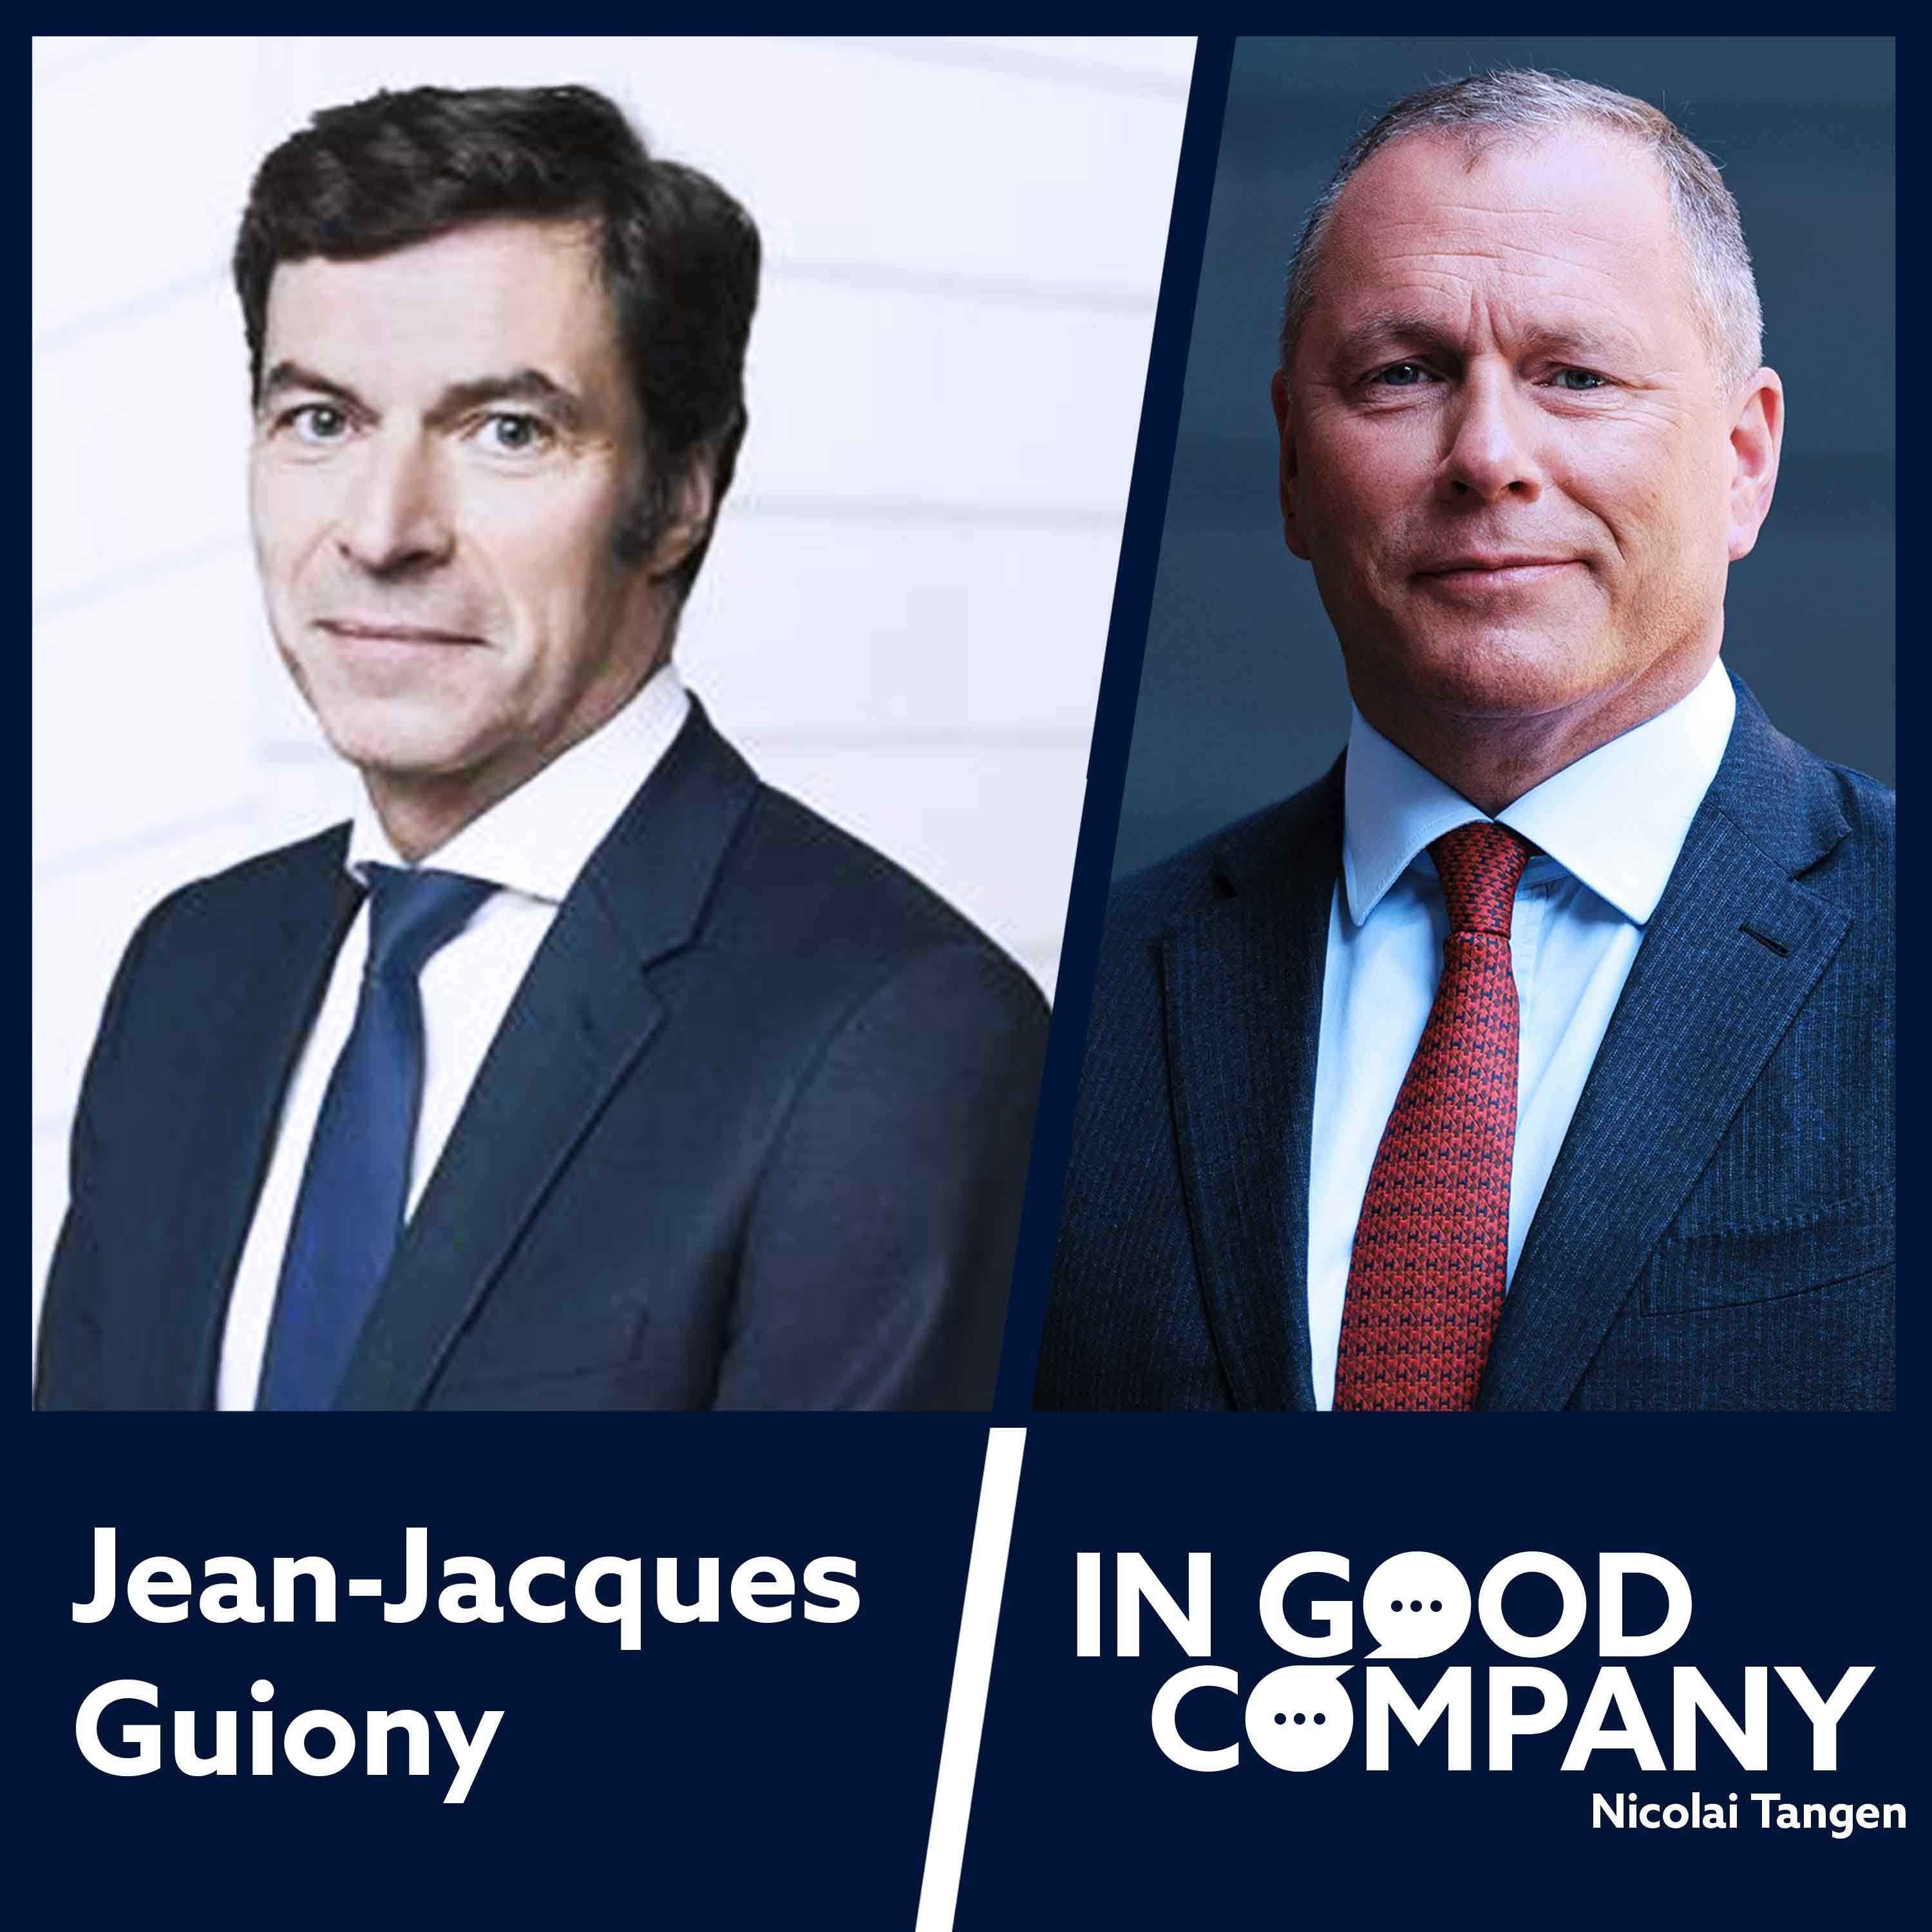 Jean-Jacques Guiony CFO of LVMH